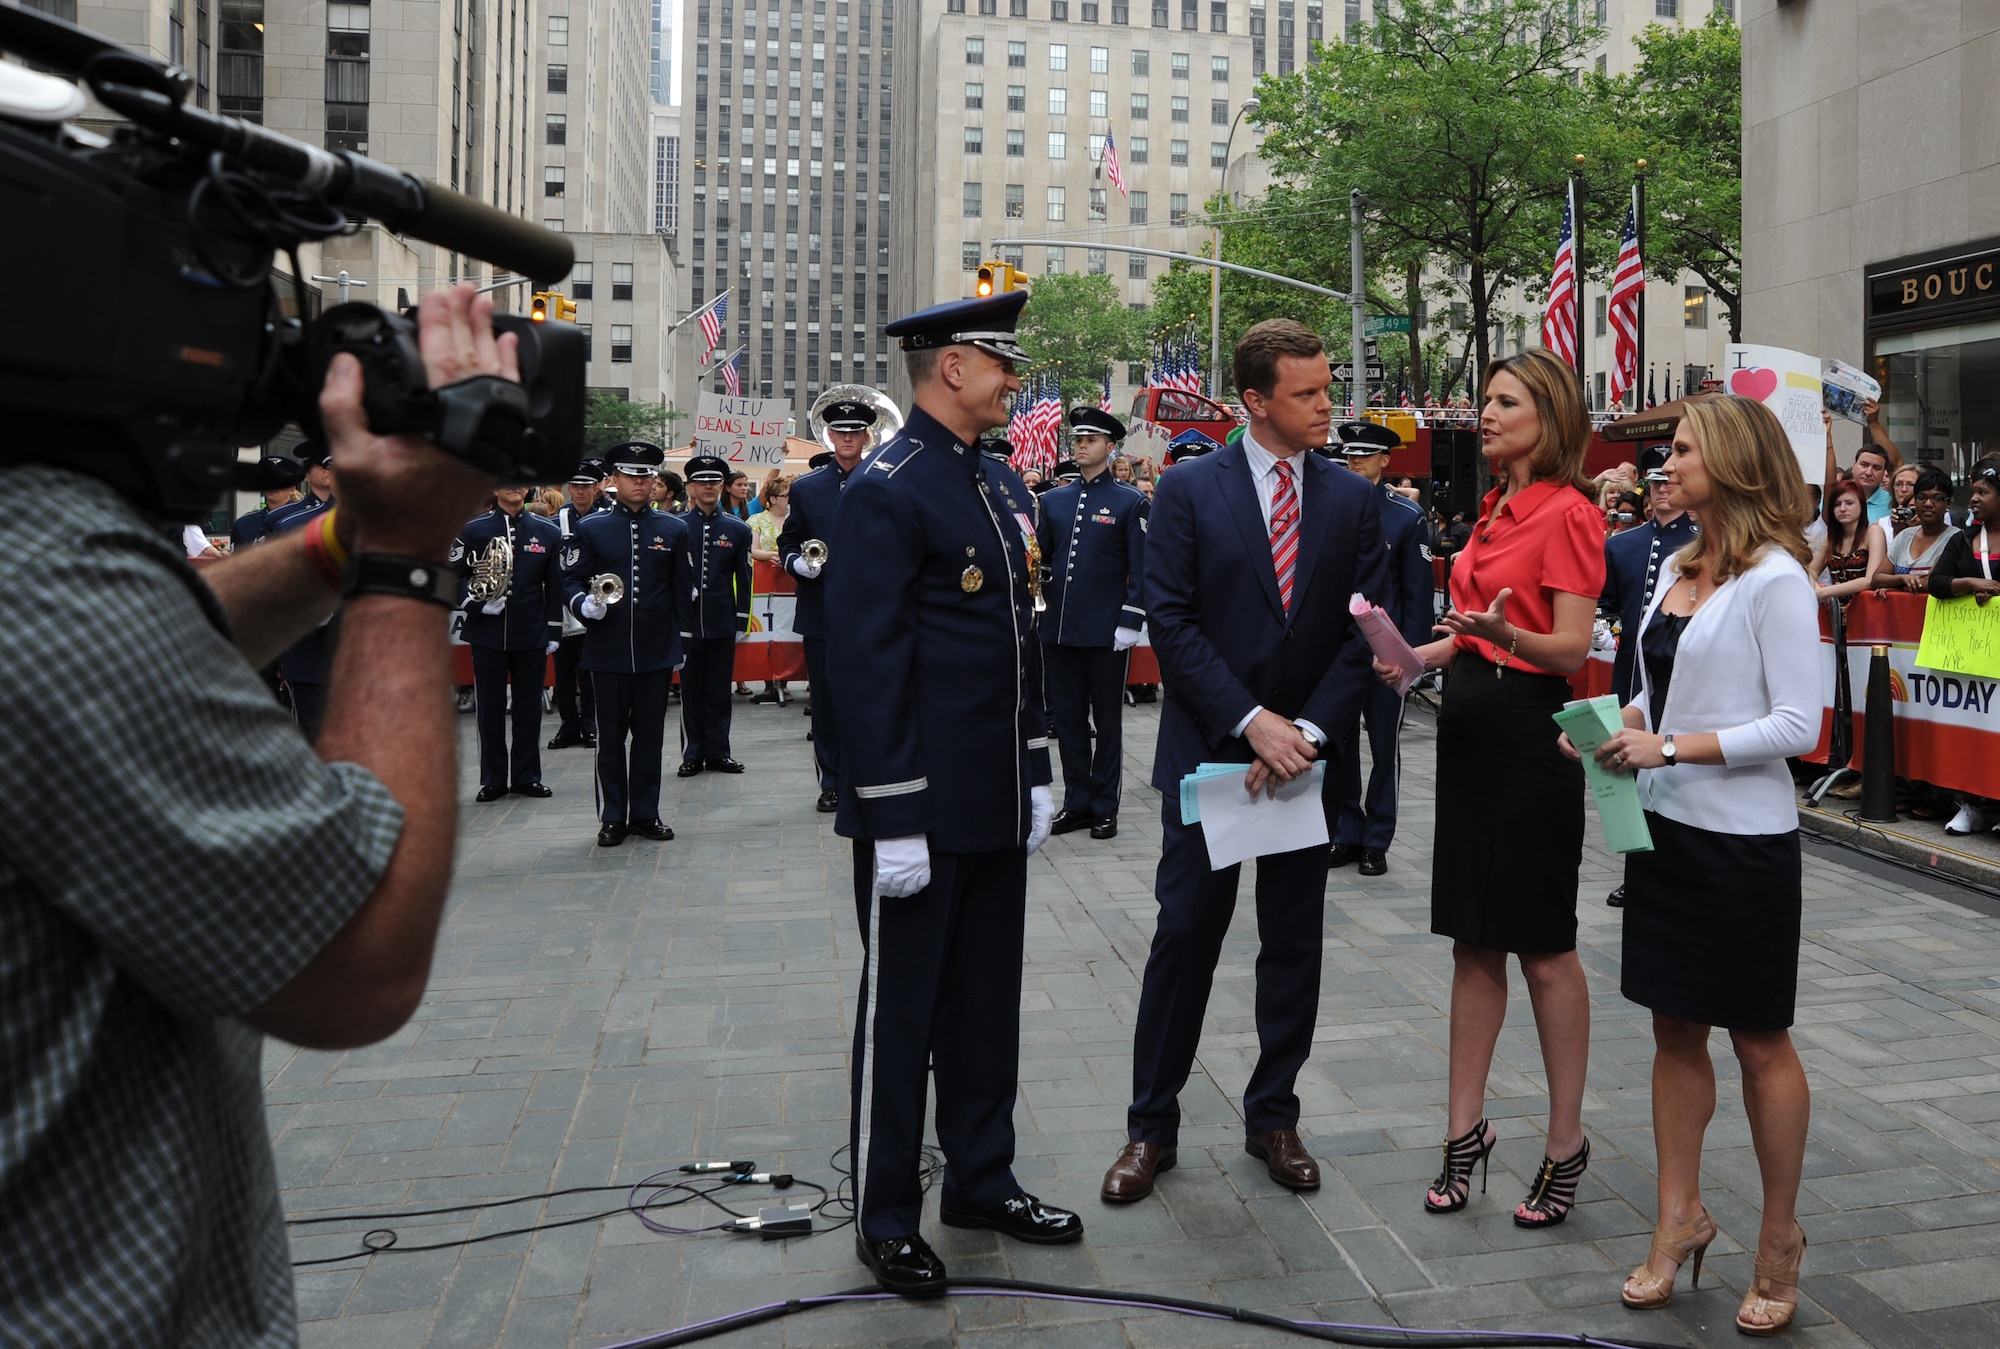 Col. A. Phillip Waite, commander and conductor of The U.S. Air Force Band informs the NBC’s Today Show anchors and their national audience, on the mission of his command during a live broadcast July 4 in New York. Following the interview, the band performed in celebration of Independence Day for the Today Show audience at the Rockefeller Center. (U.S. Air Force photo by Staff Sgt. Christopher Ruano)